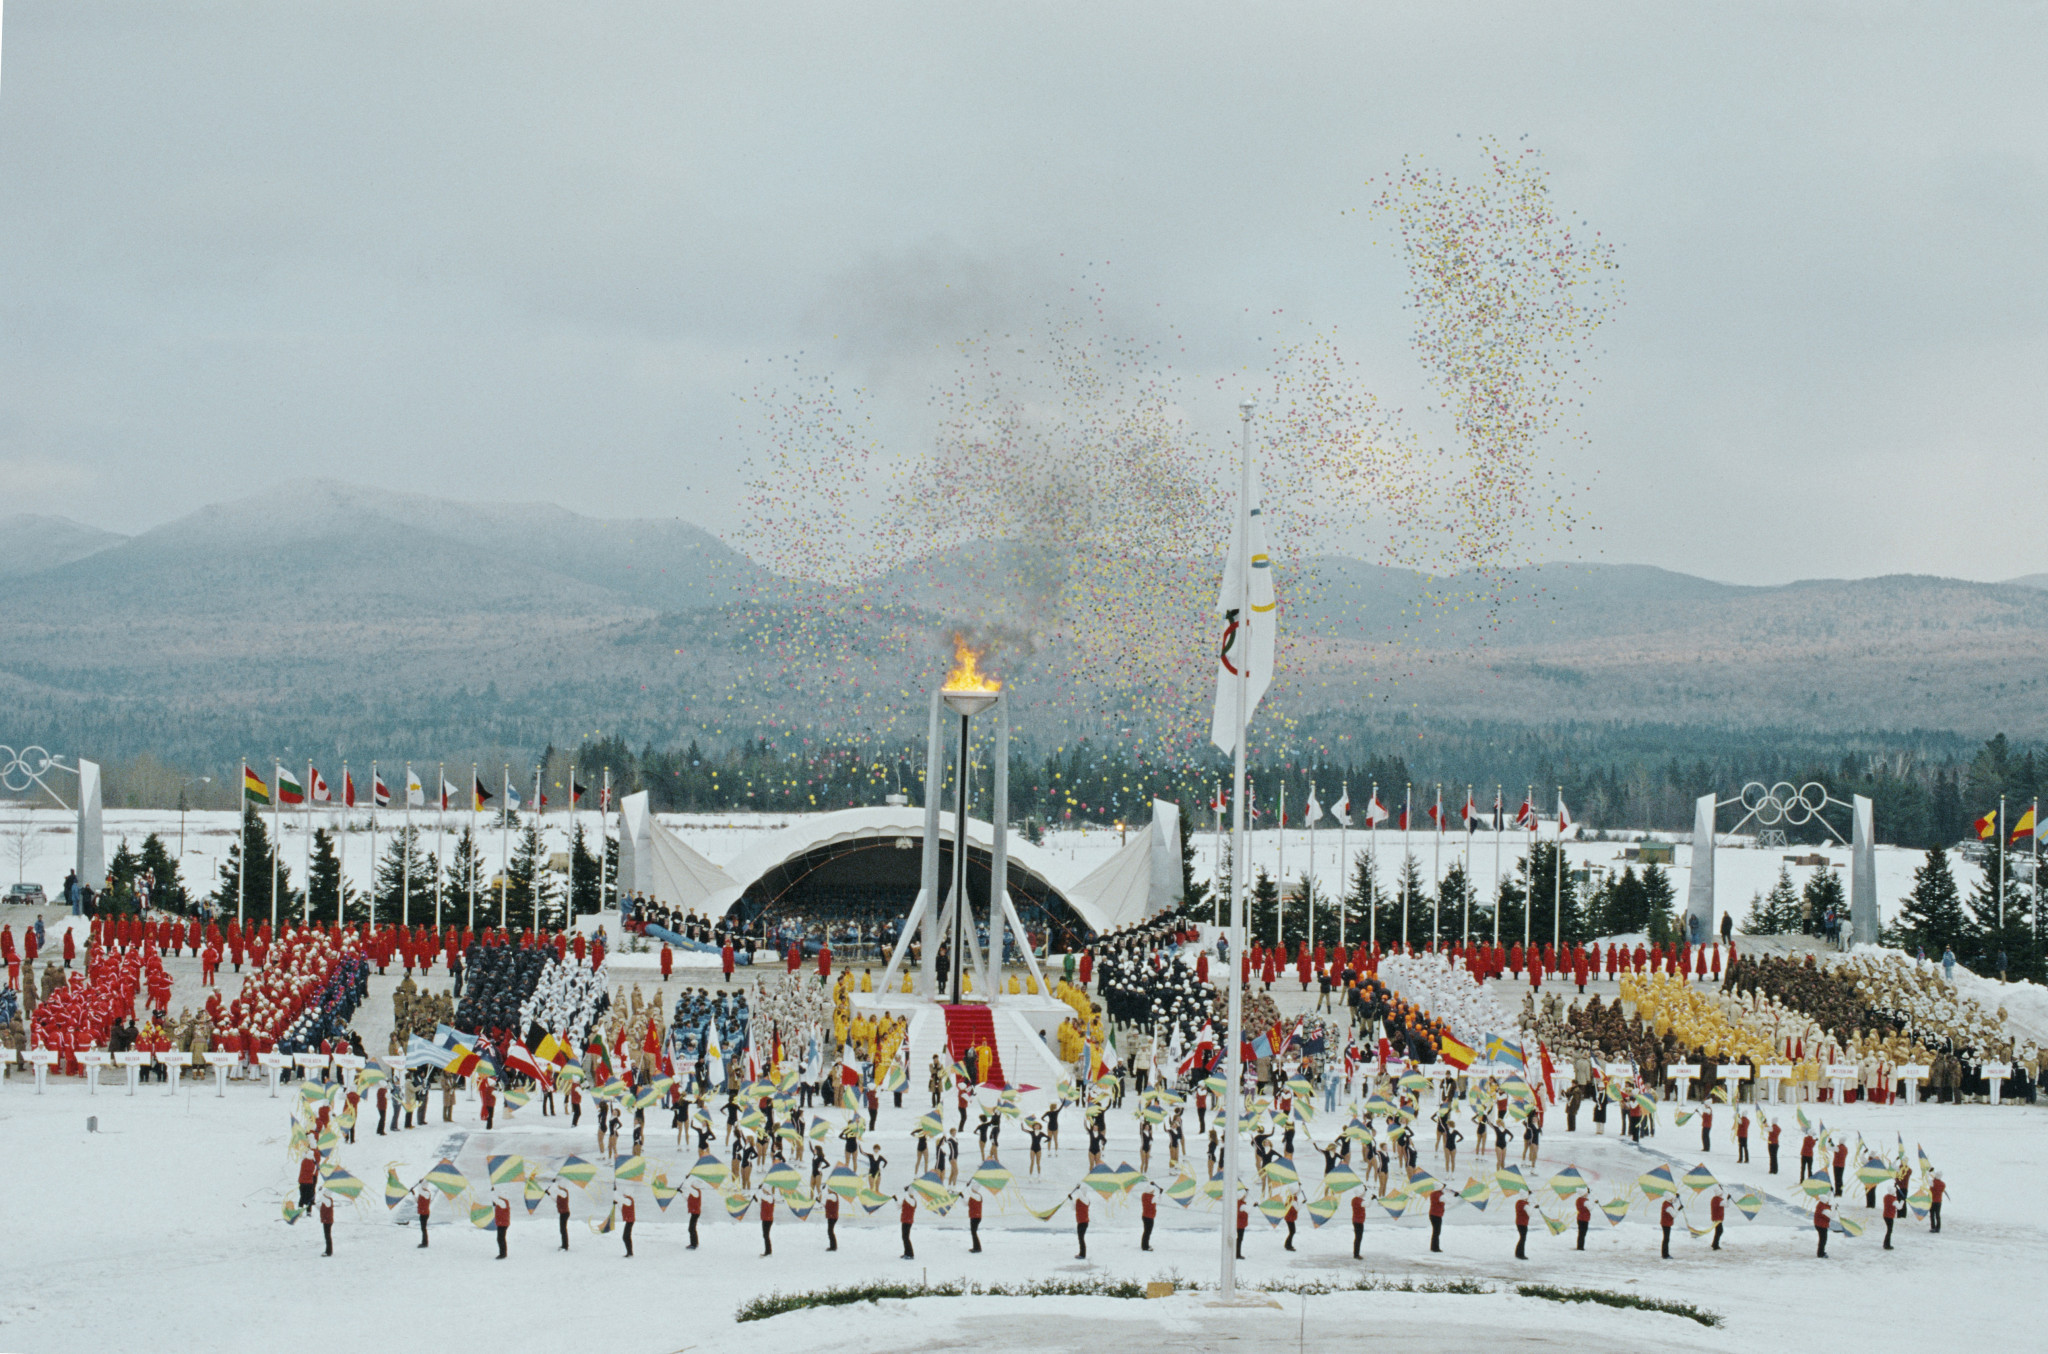 Lake Placid previously held the Winter Olympics in 1932 and 1980 ©Getty Images